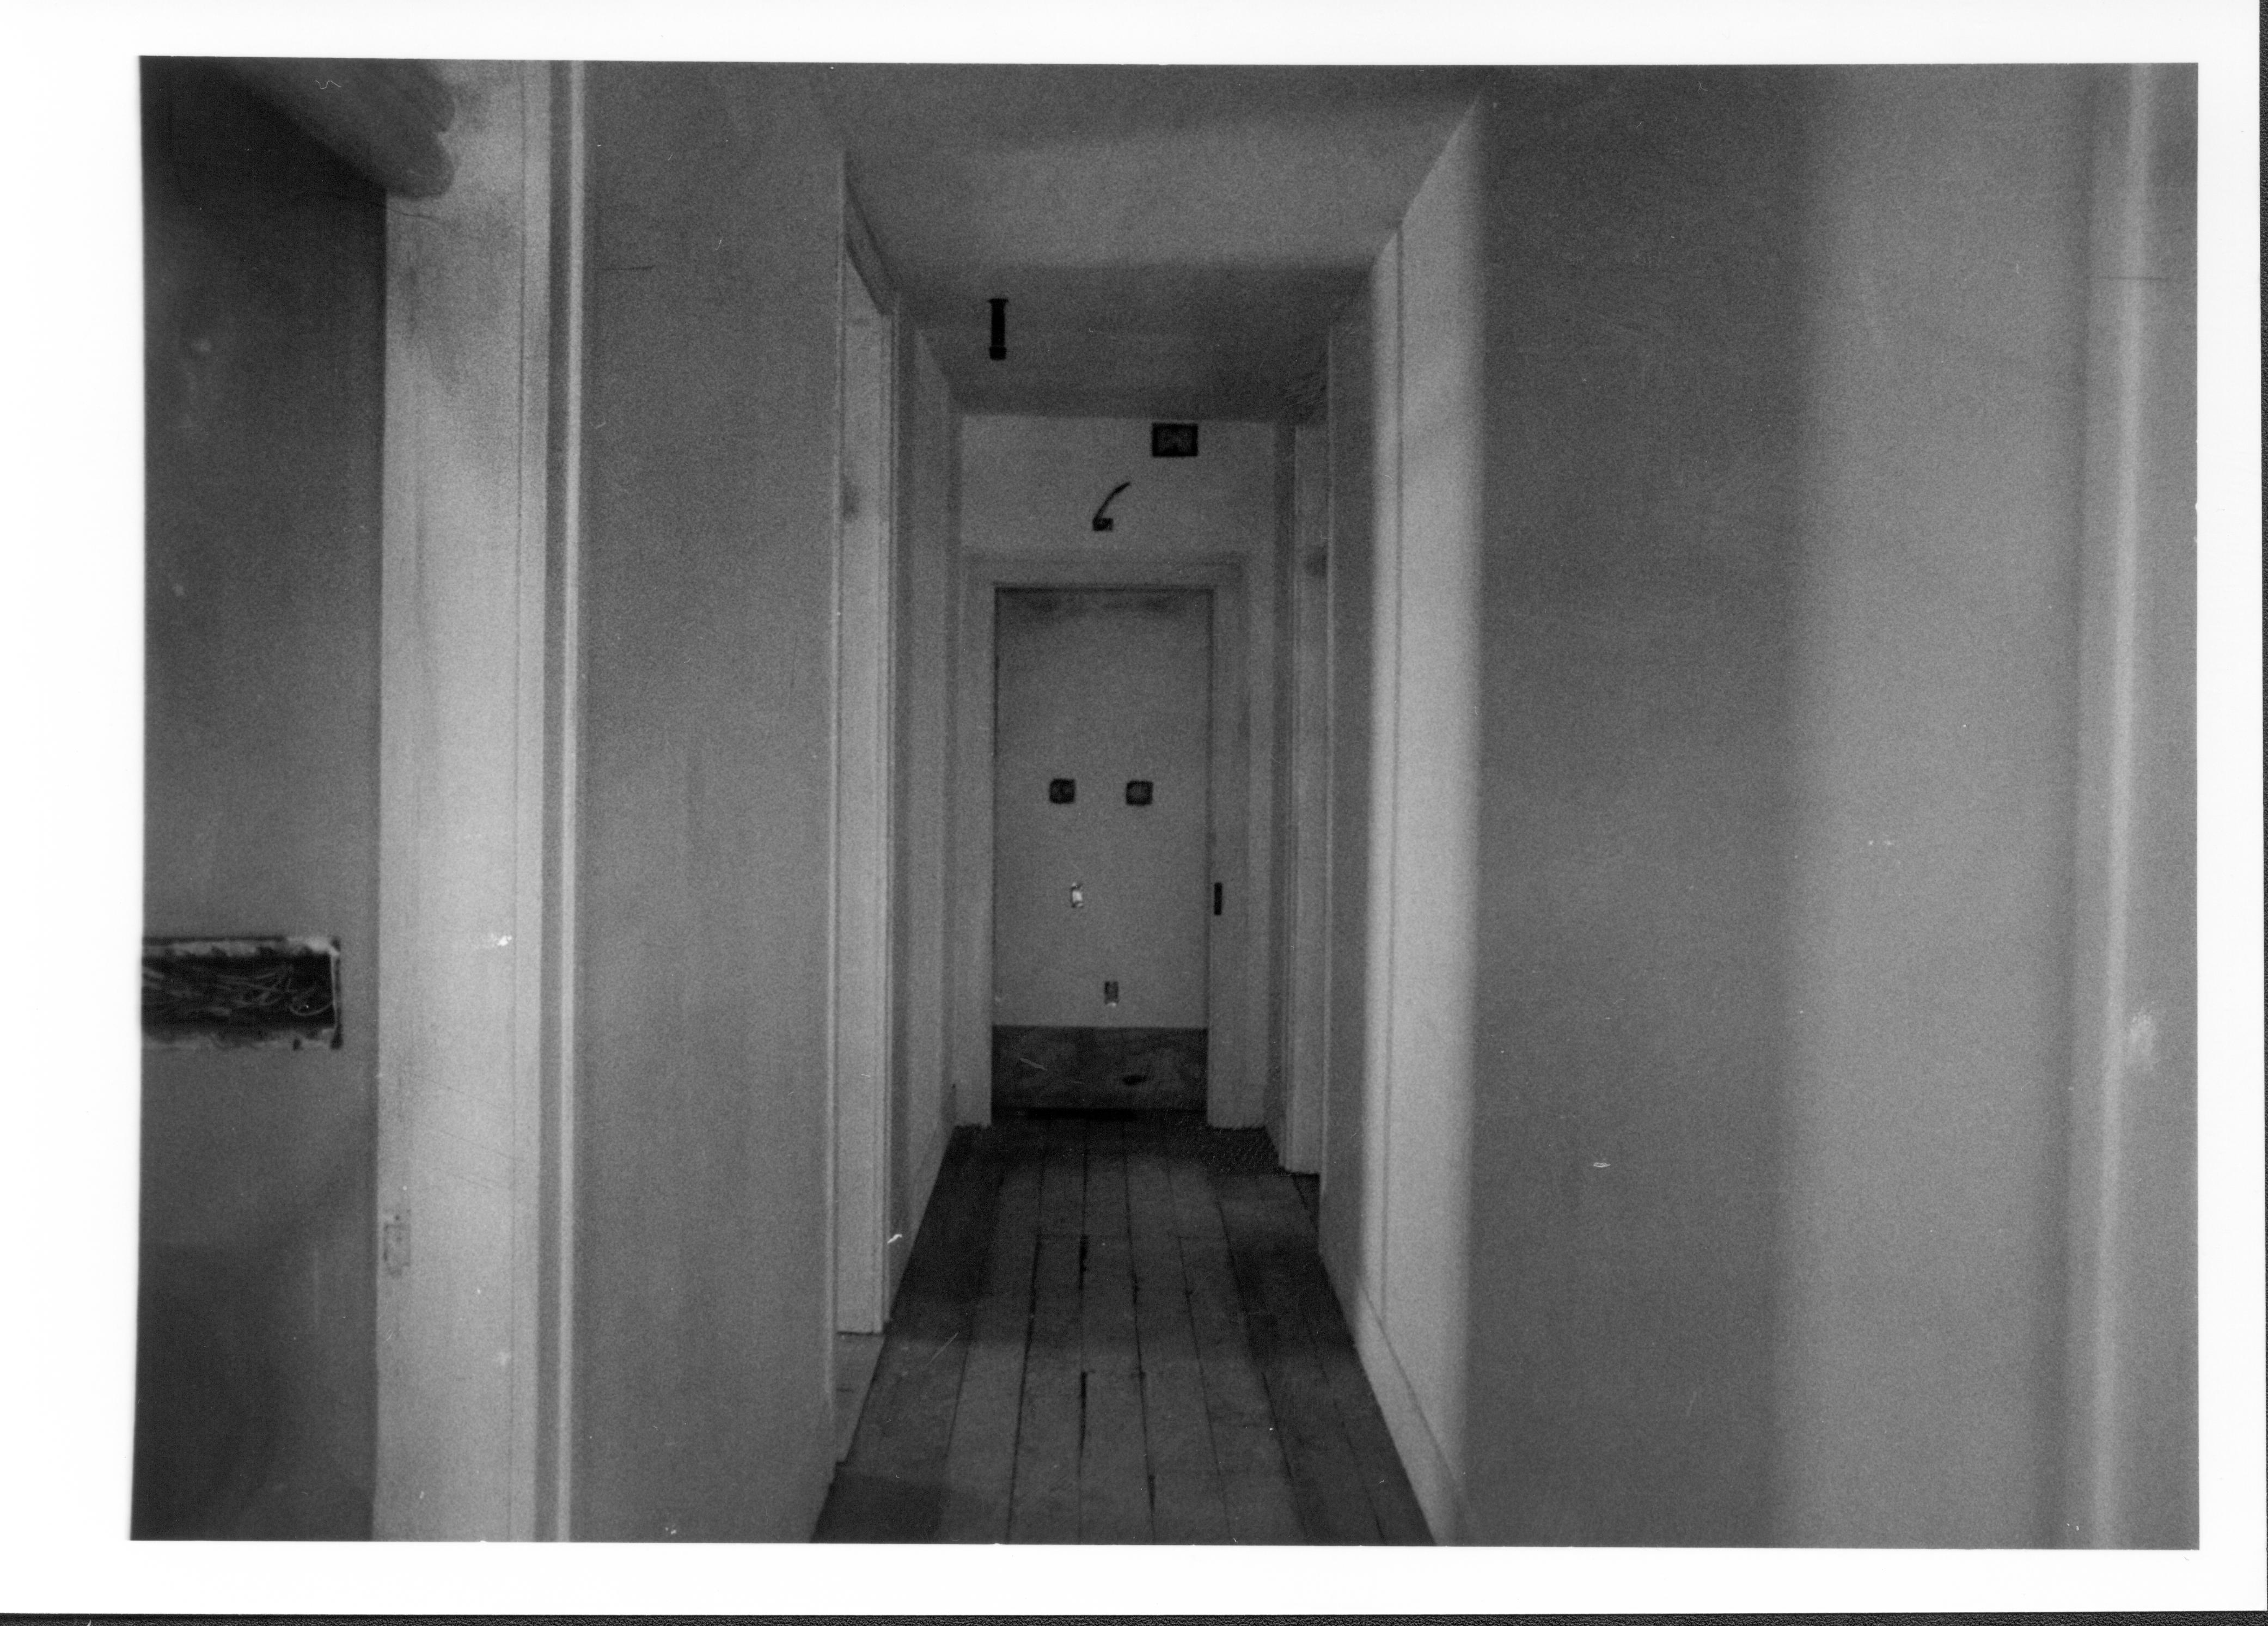 Rm 204 - 2nd Floor rear hall Lincoln, Home, Restoration, rear, hall, upstairs